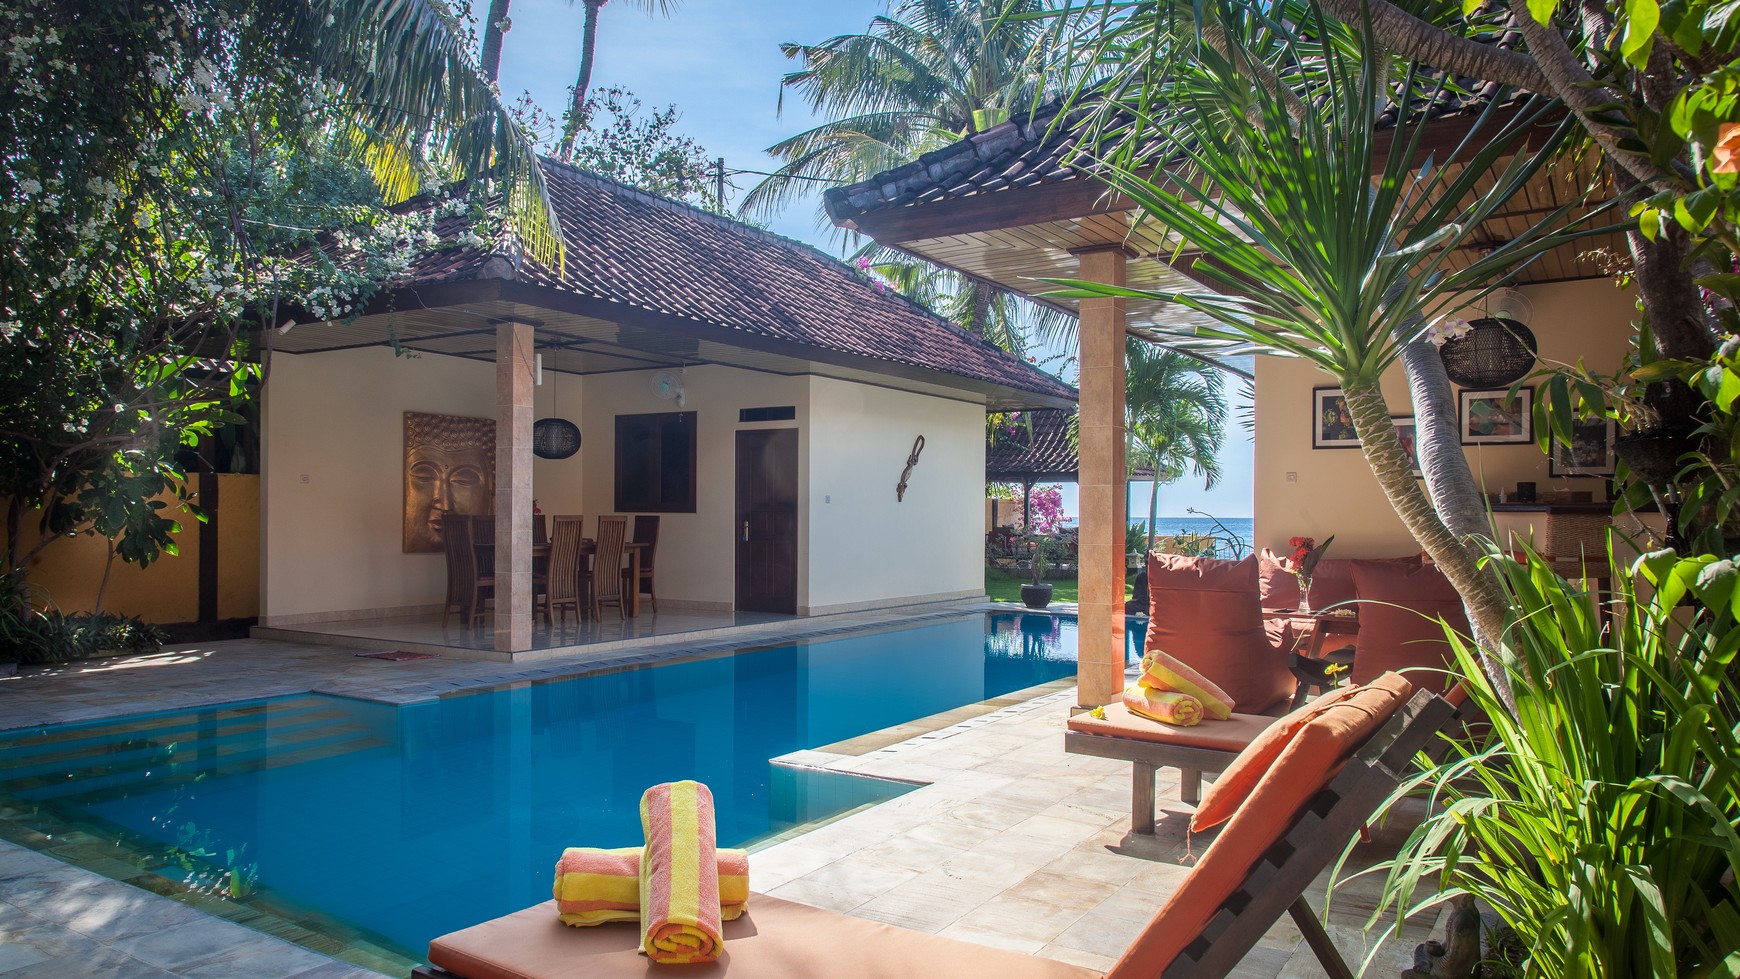 Price Dropped From IDR 3,500,000,000 to IDR 2,999,000,000 Leasehold Absolute Beachfront Villa